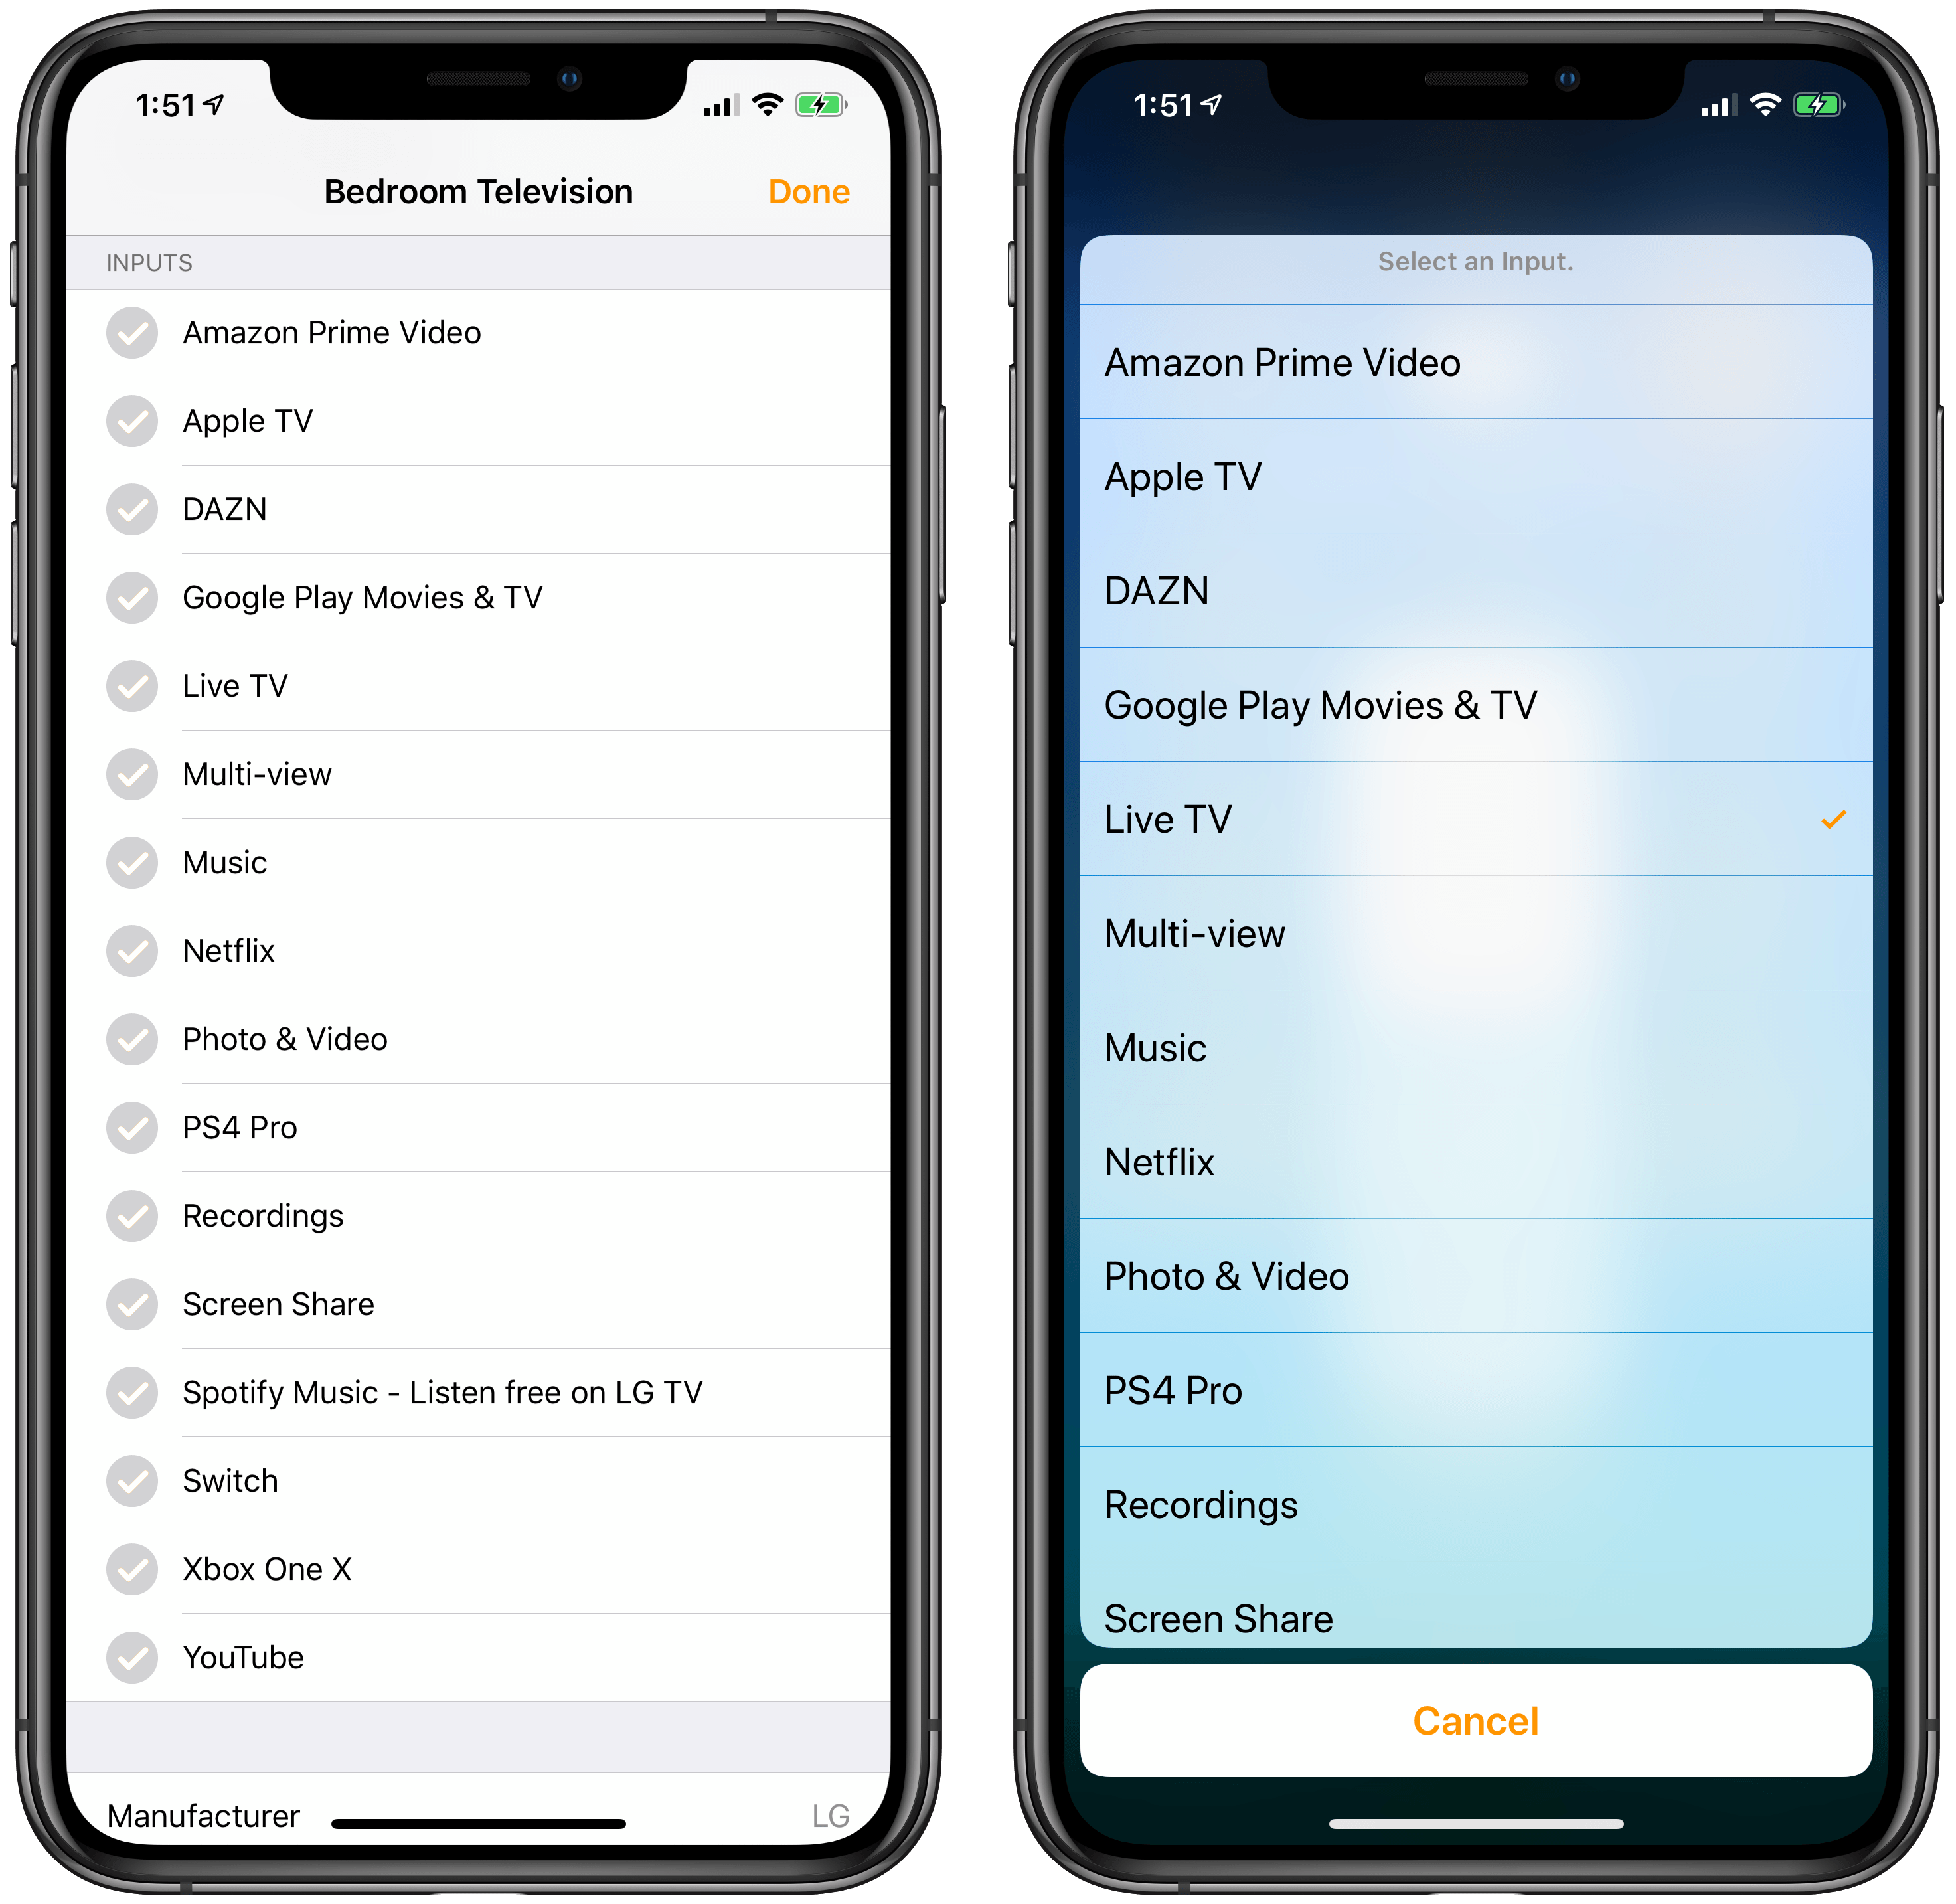 Switching inputs in the Home app (right).